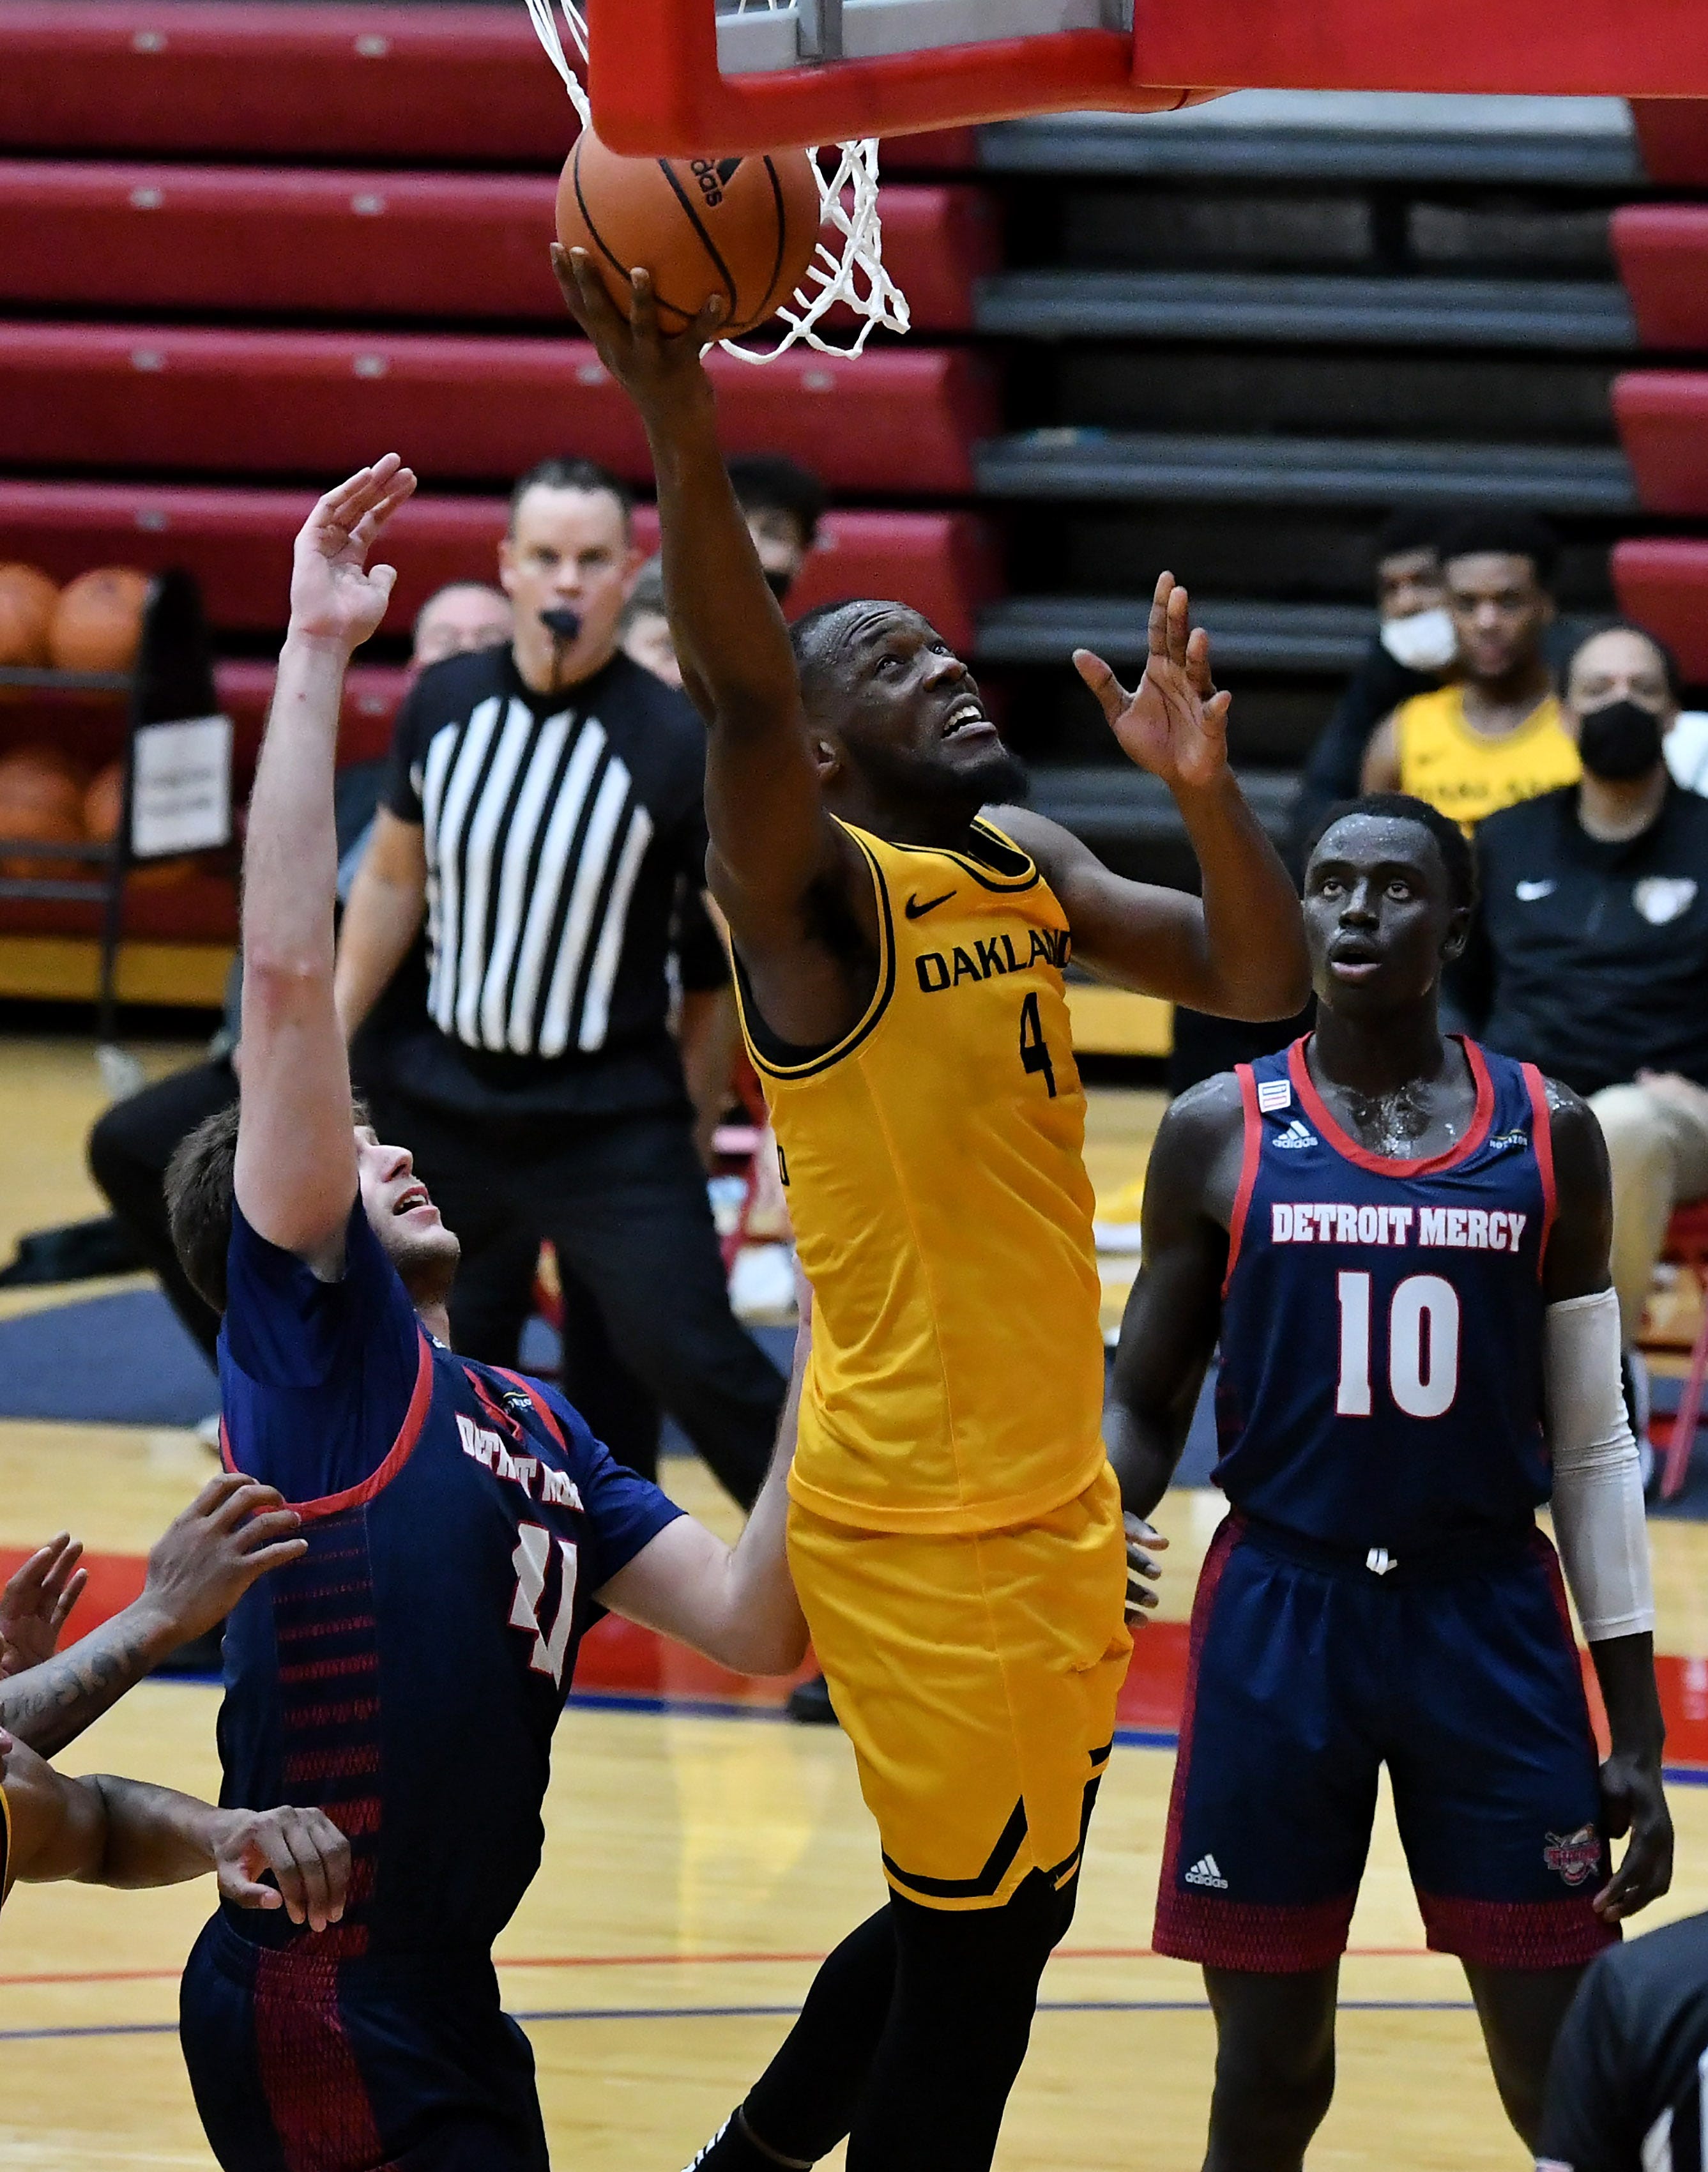 Forward Daniel Oladapo had 11 points and 10 rebounds in Oakland's victory over Youngstown State on Friday.